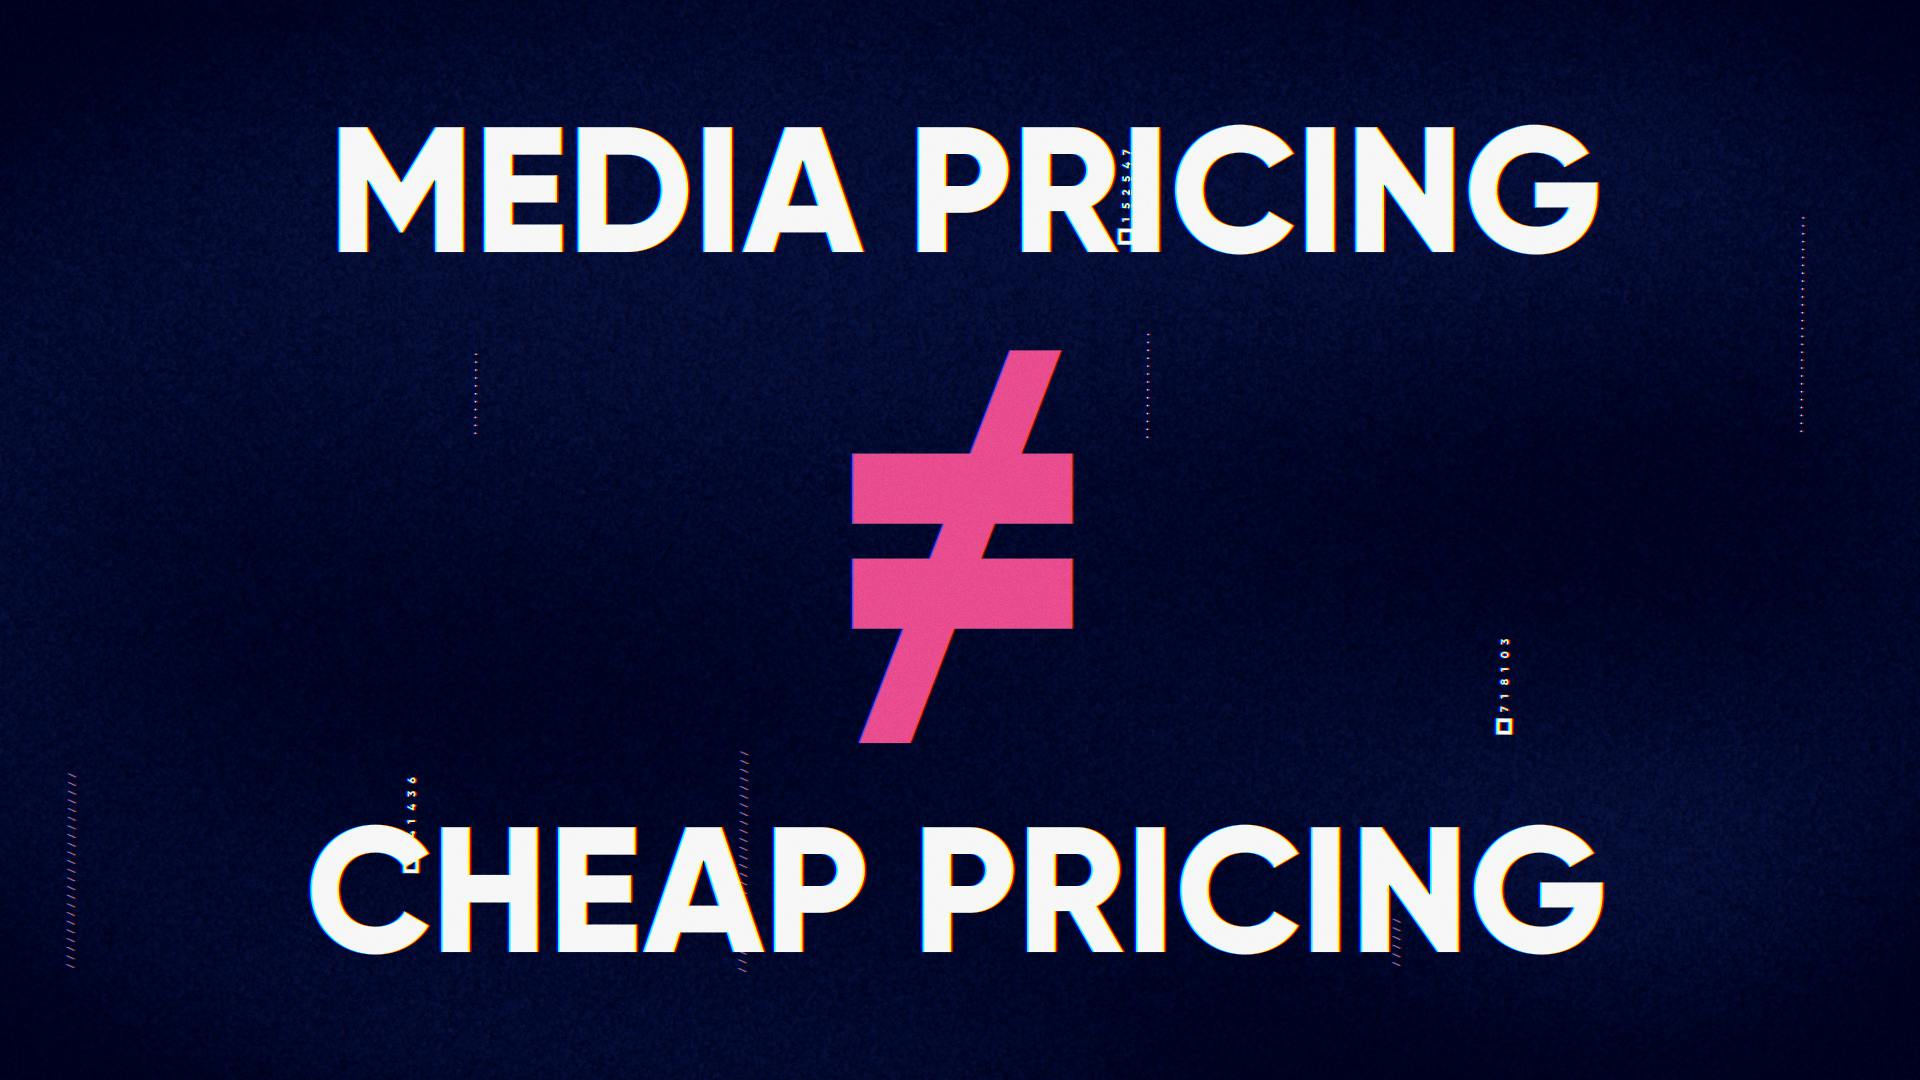 Media pricing does not equal cheap pricing